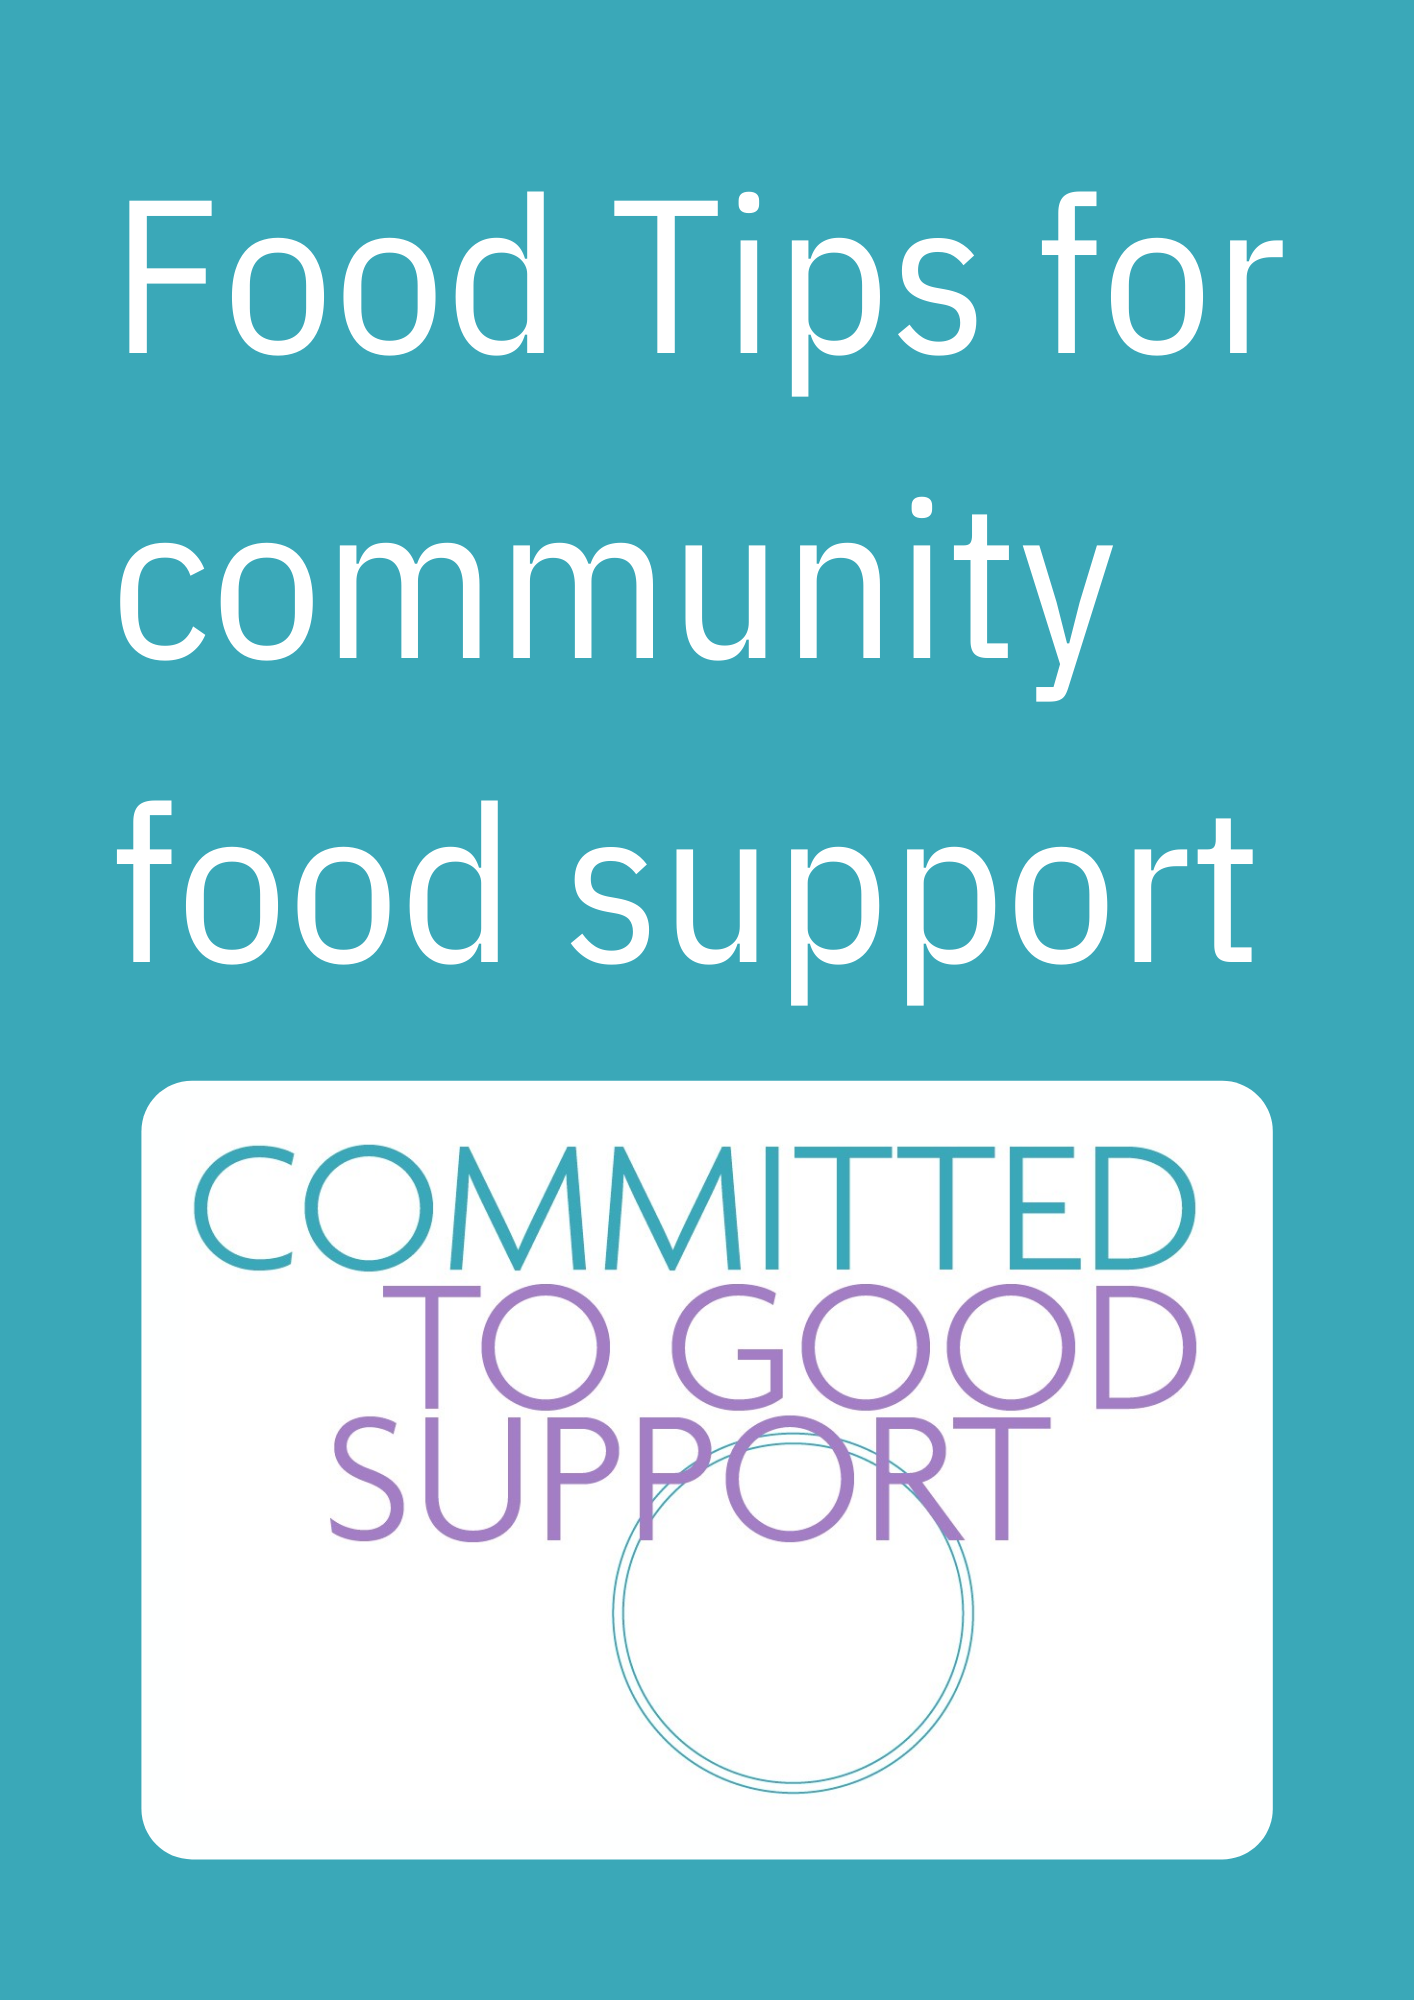 Food tips for community food support. Committed to Good Support